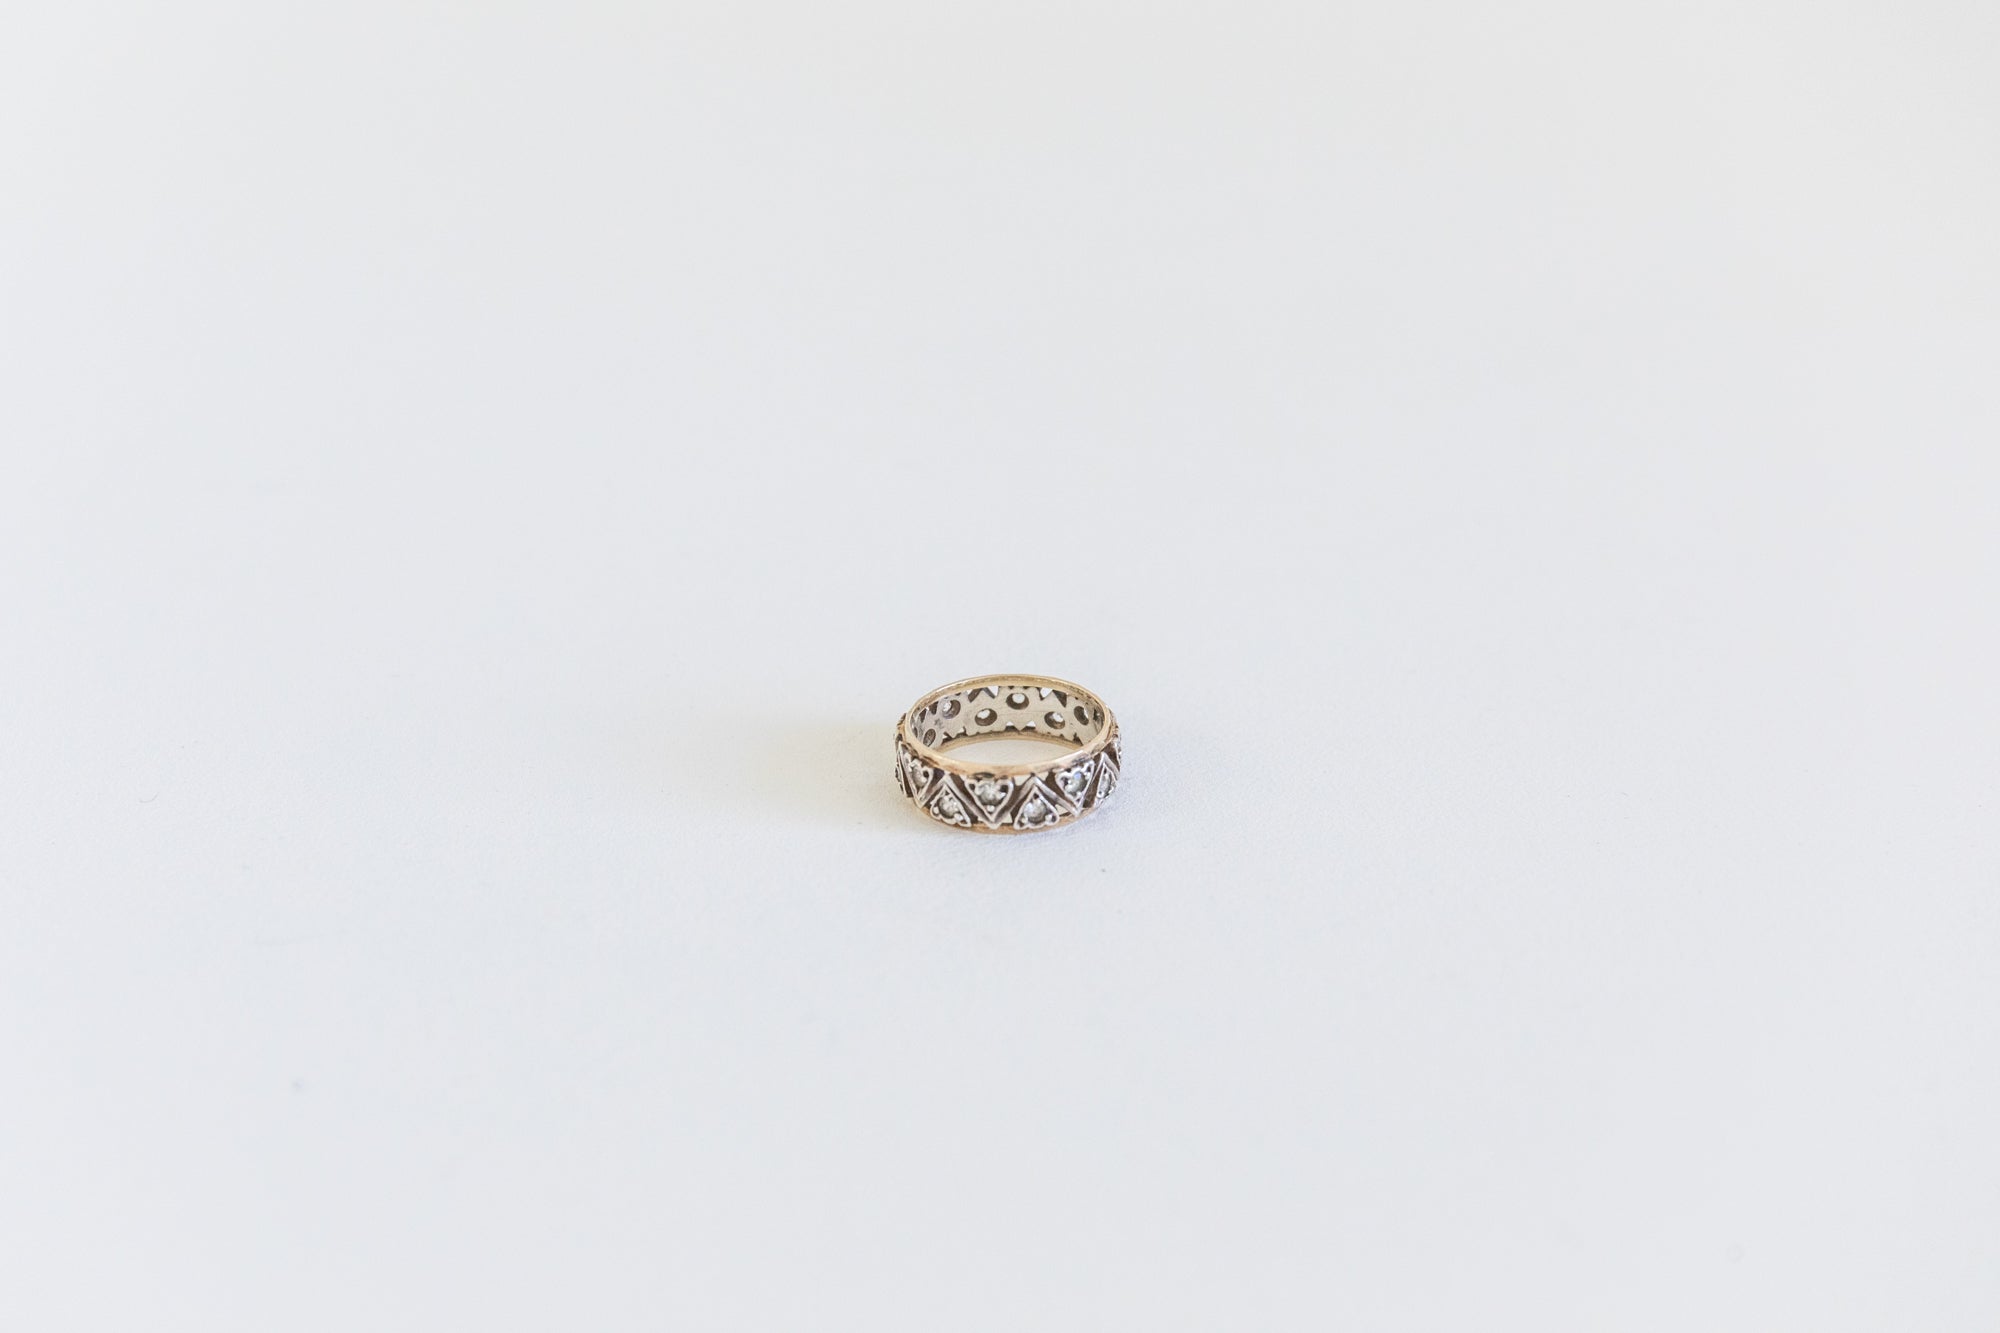 Suzanne Donegan, Heart Band Ring